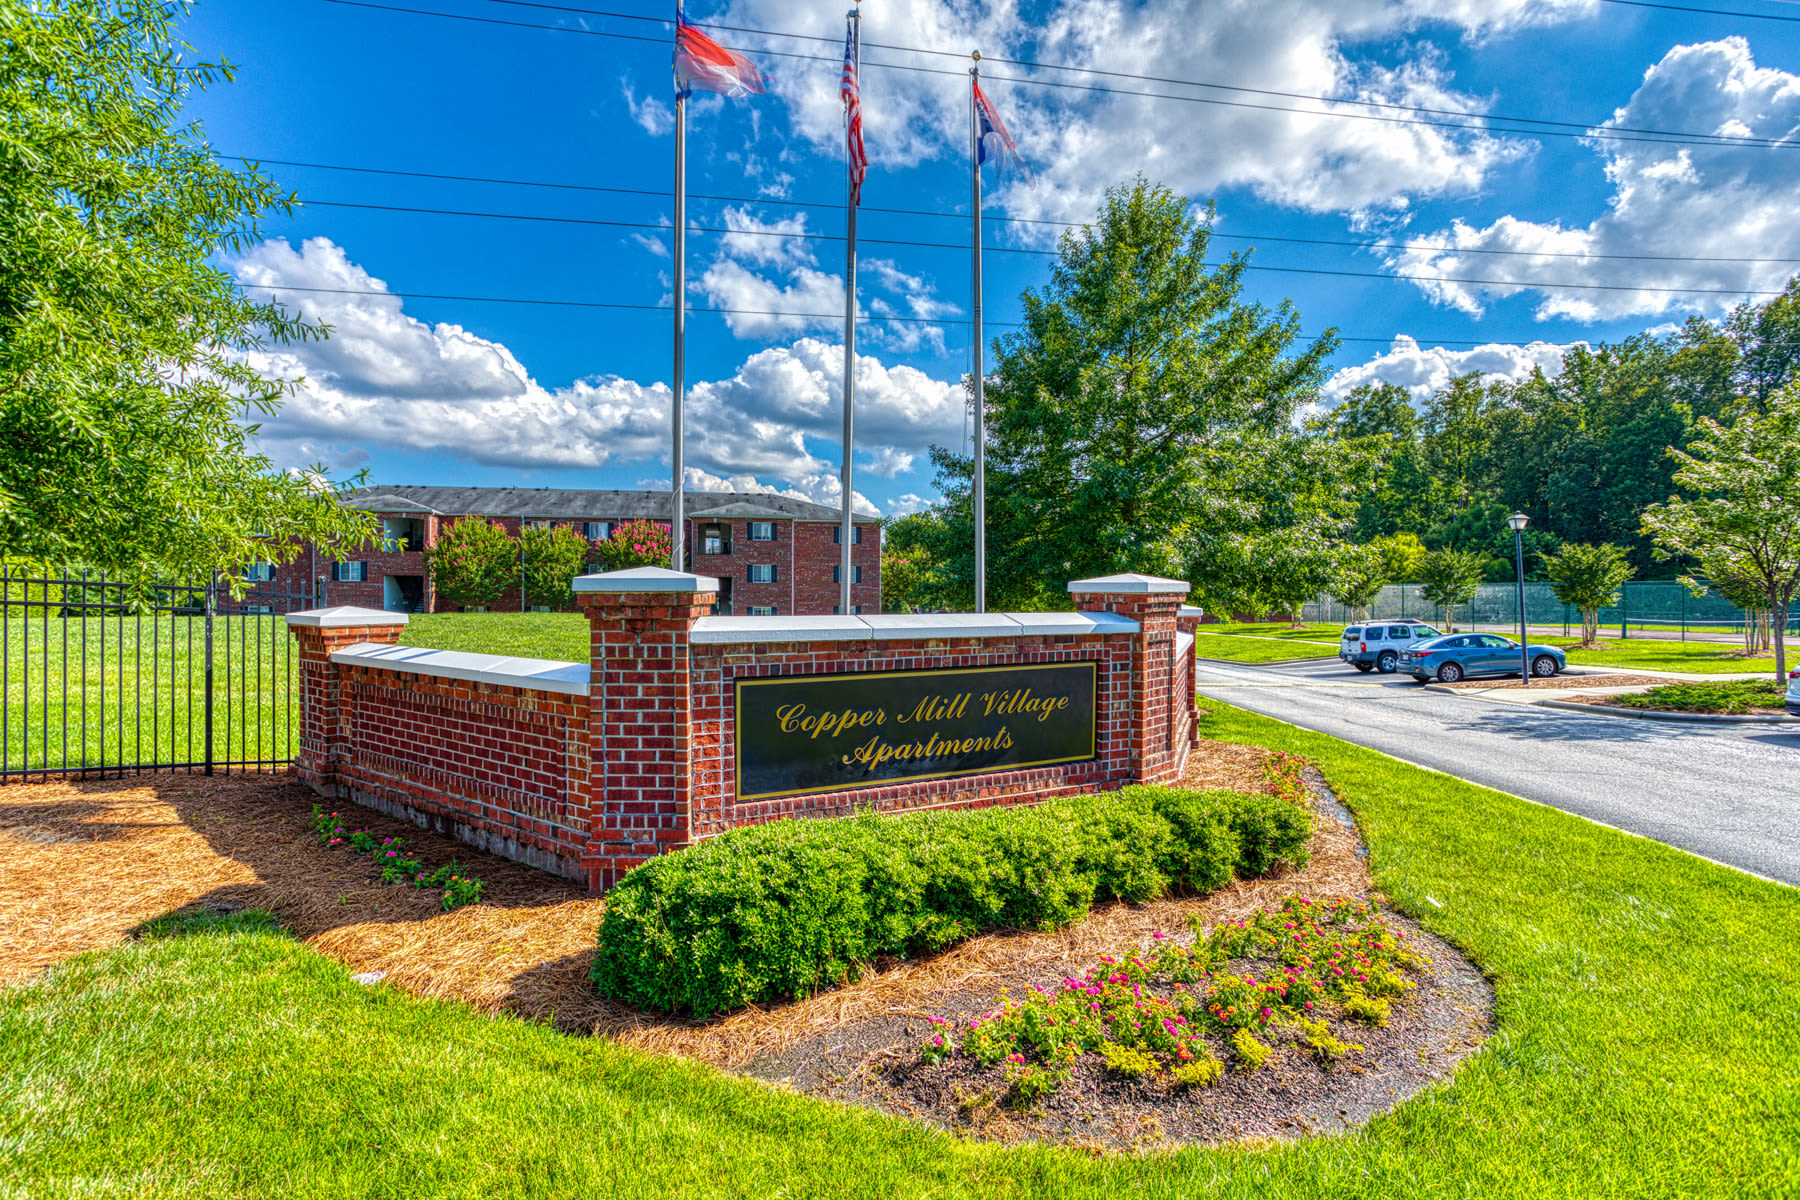 Front sign at Copper Mill Village in High Point, North Carolina